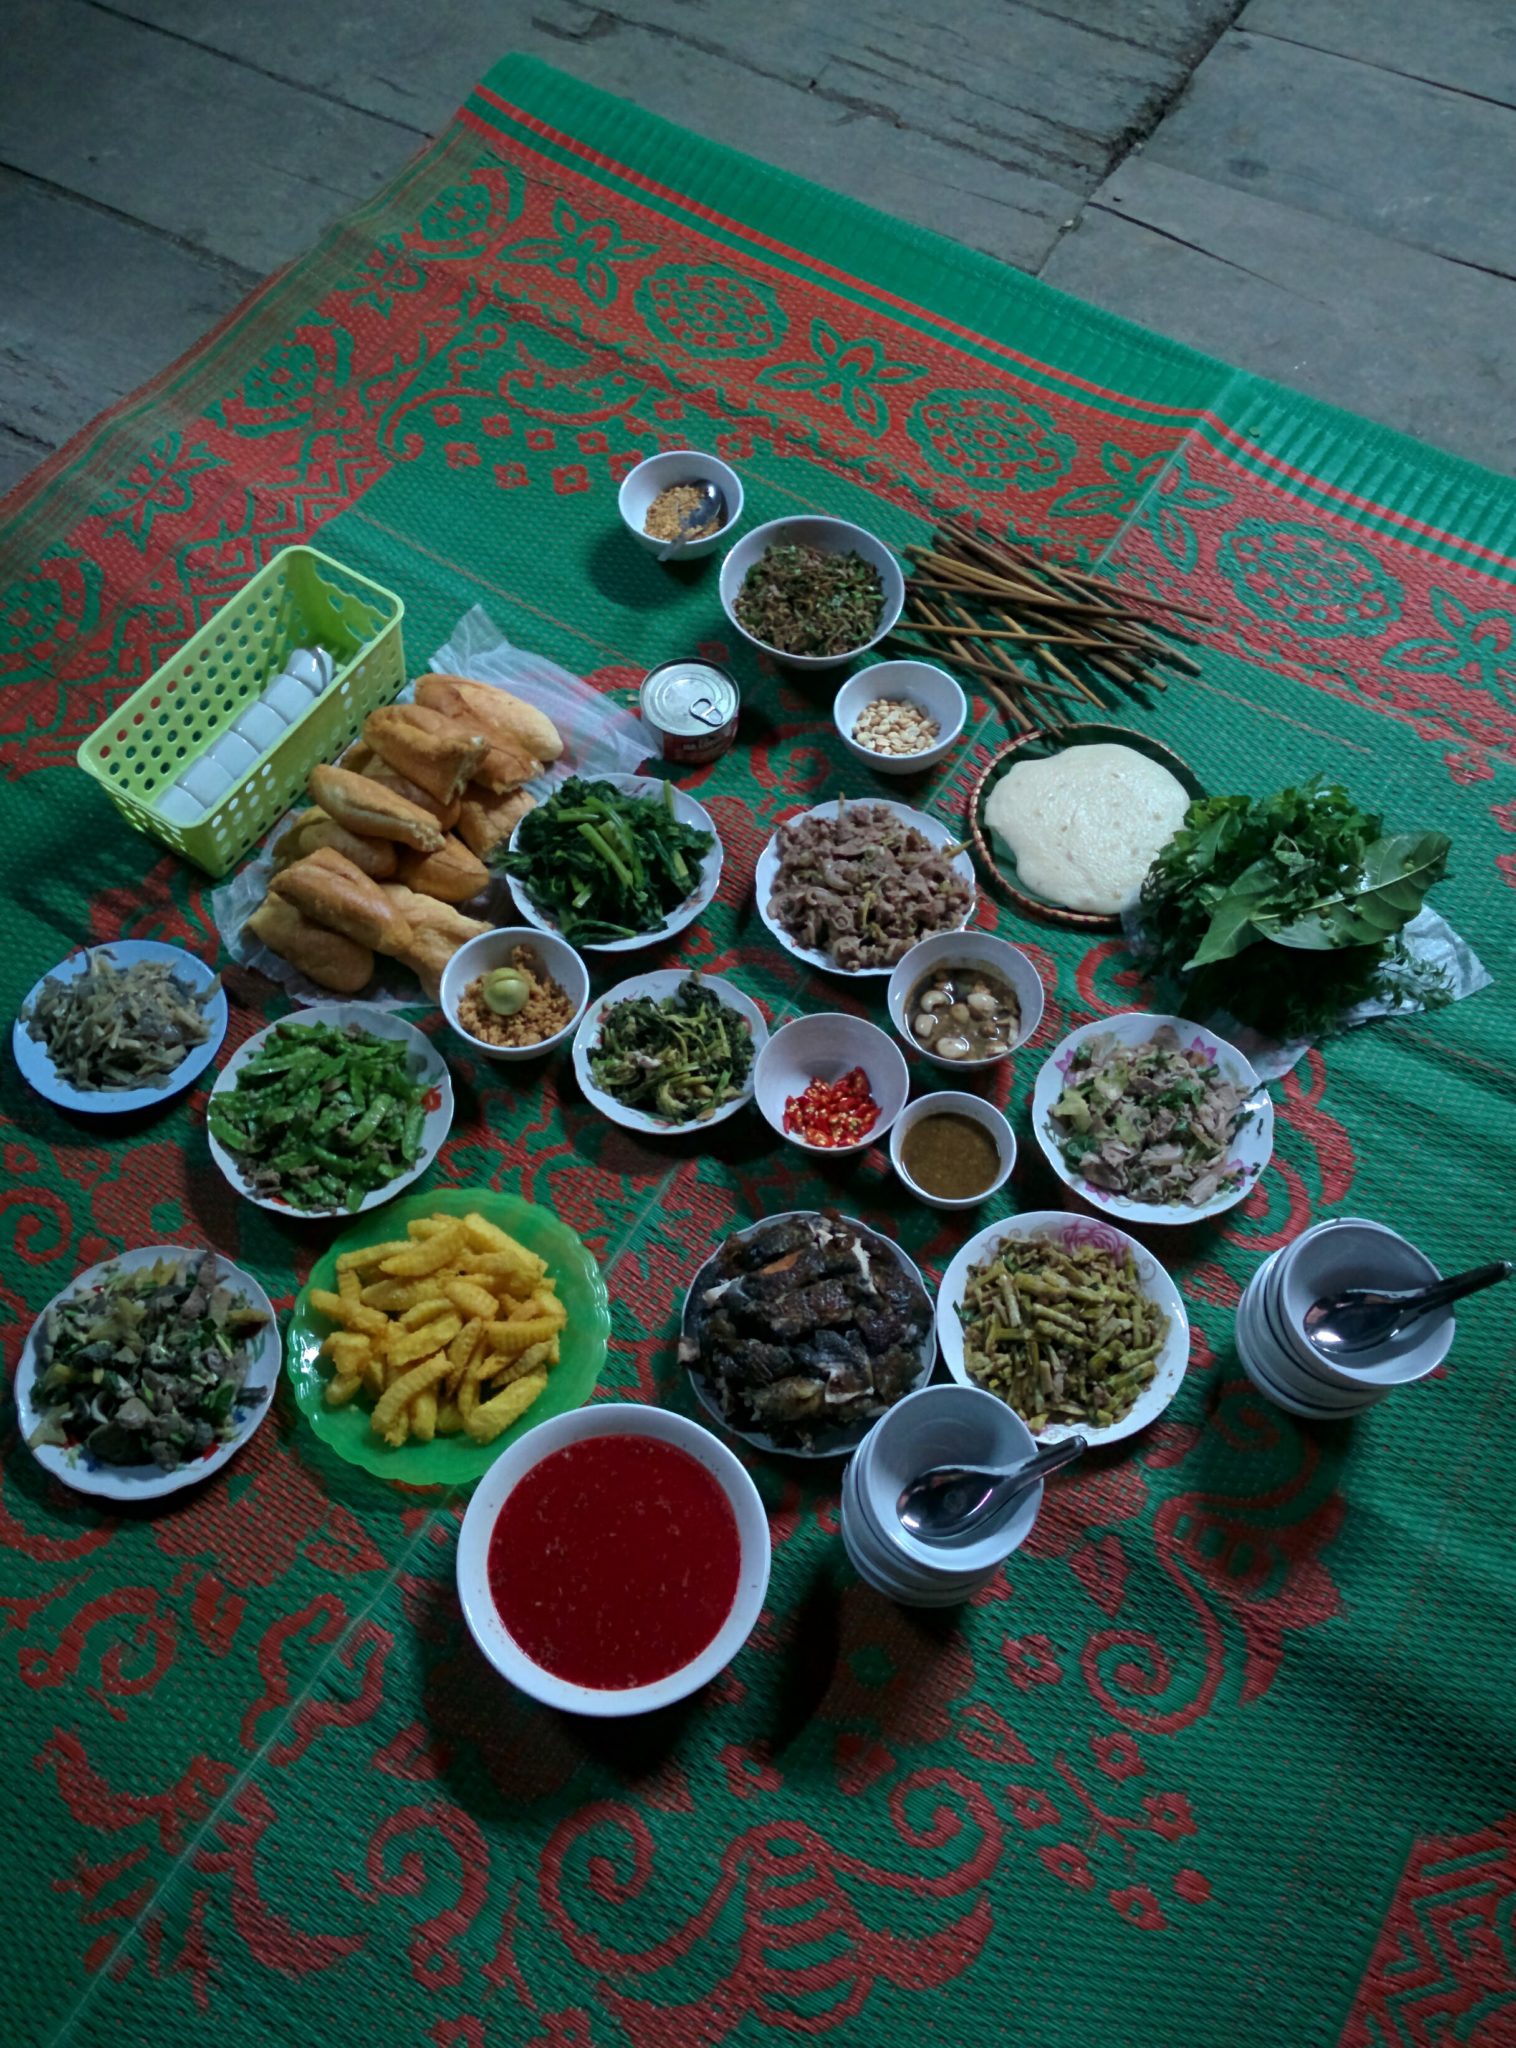 ha giang food - 10 local foods not to miss while in Vietnam